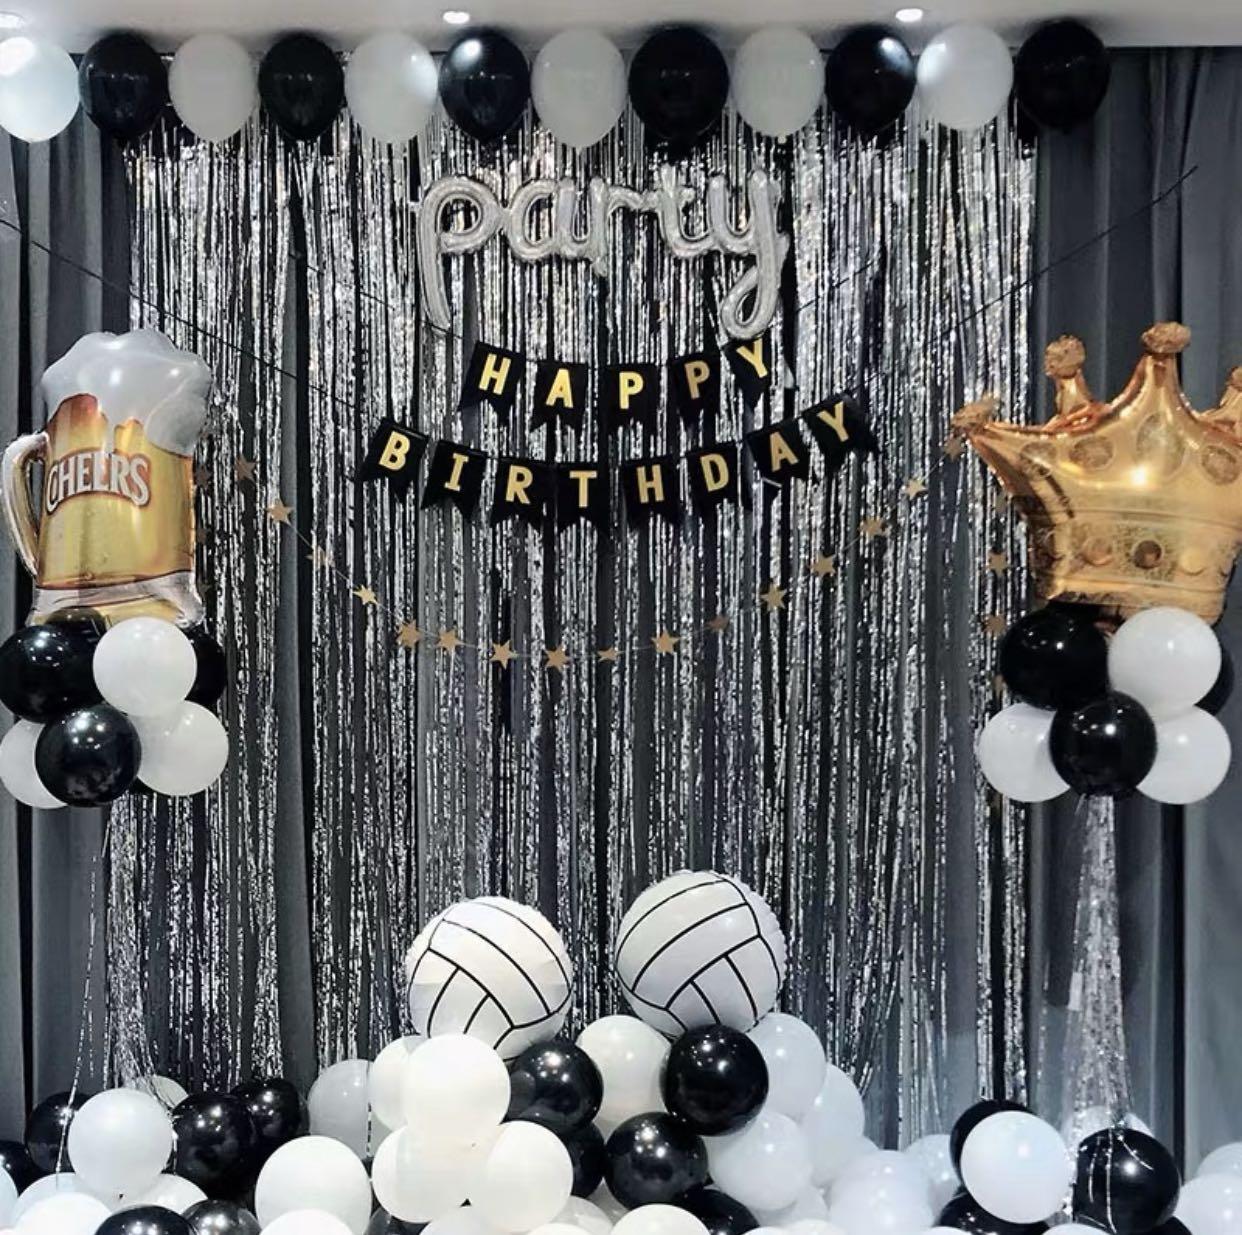 diycrafts2019.ml  White party decorations, Black and white party